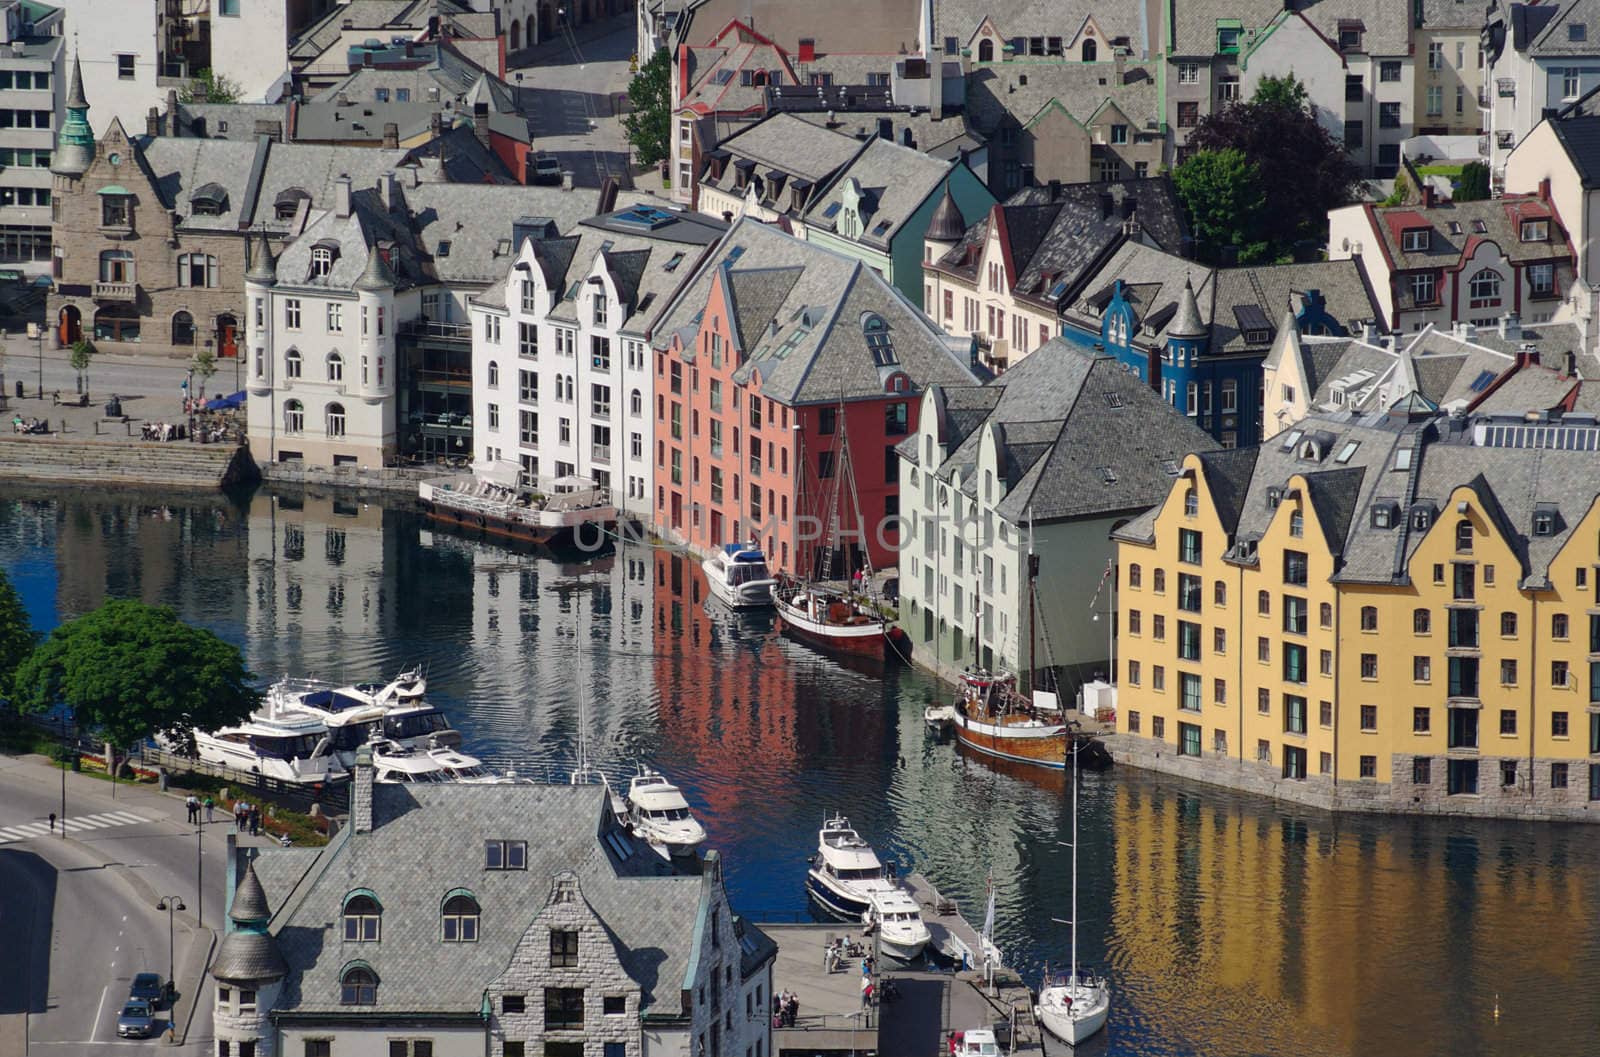 The inner harbour of the Norwegian port town of Aalesund. 
After a fire in the year 1904 the city was build up again in the architectural style of Art Nouveau (Jugendstil), which it is famous for.